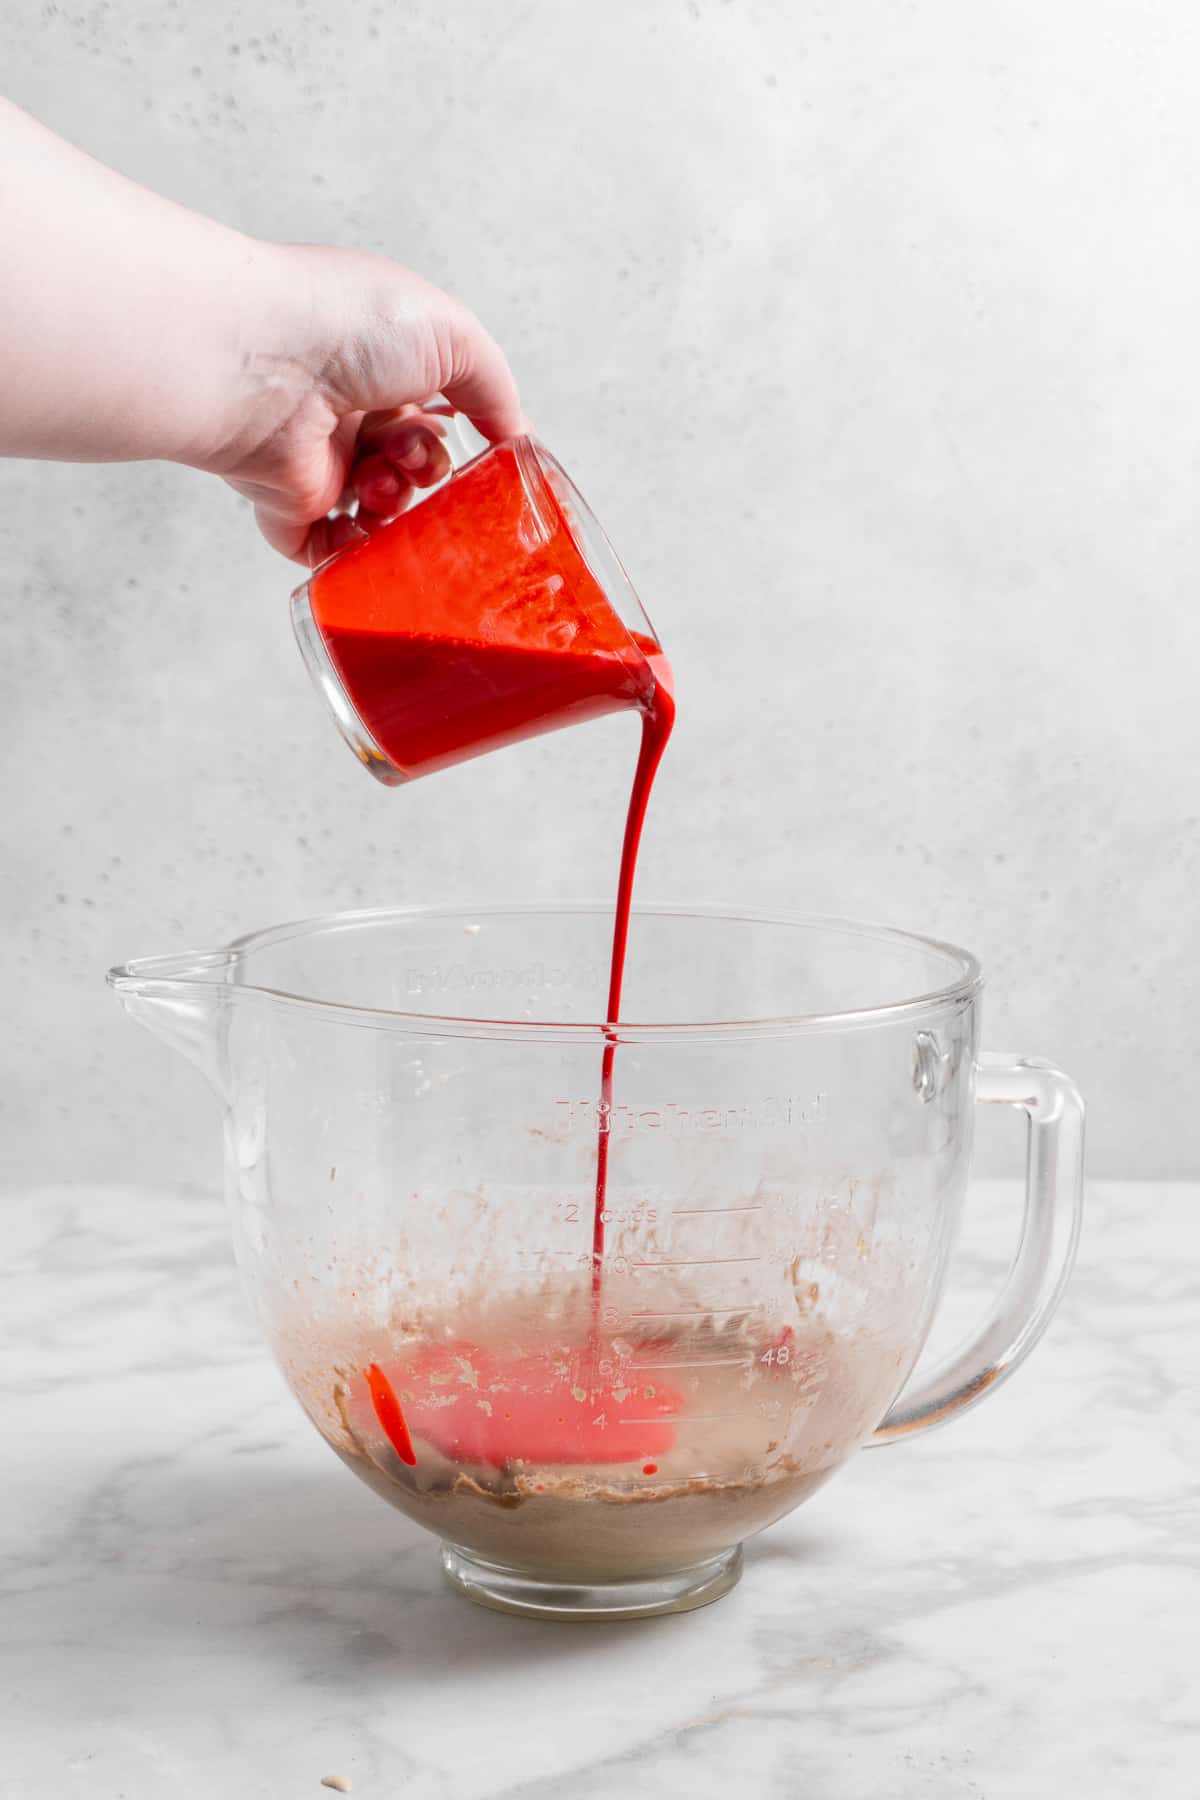 red velvet cupcake batter in a glass mixing bowl.